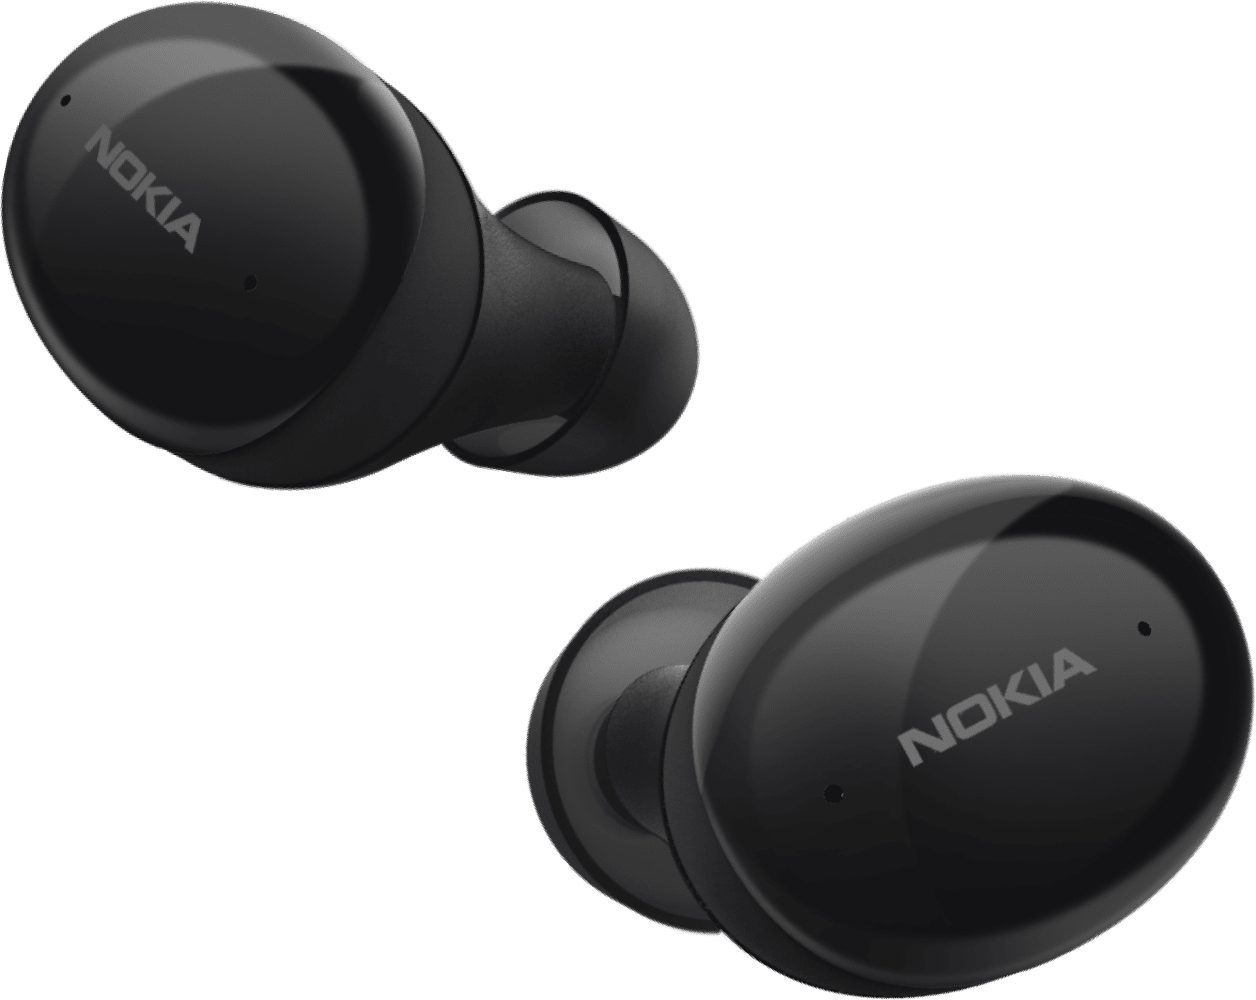 Enlarge Negro Nokia Comfort Earbuds  from Back